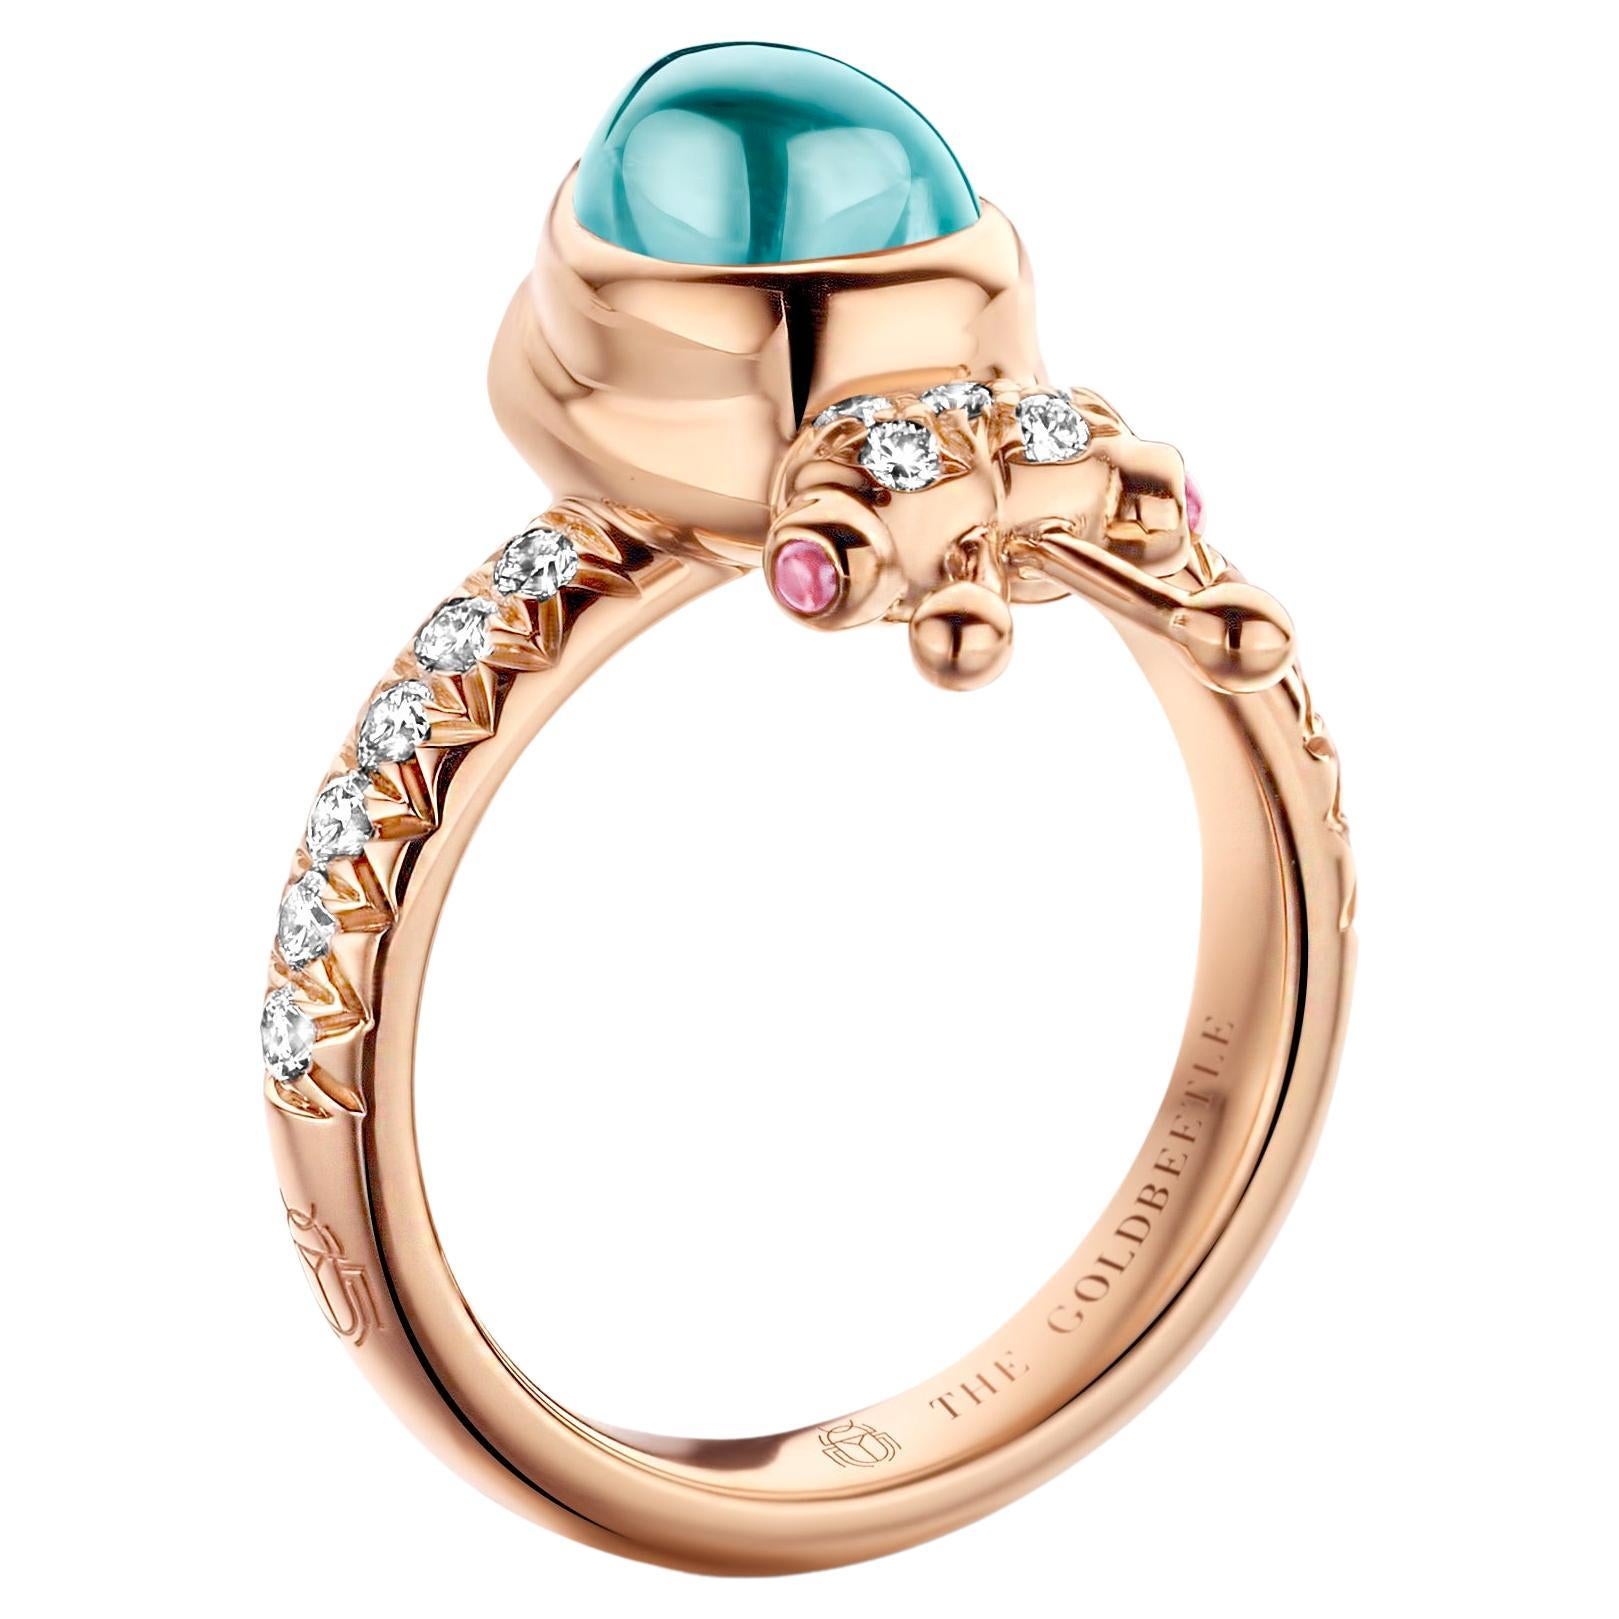 One-of-a-kind lucky beetle ring in 18 Karat rose gold 8,6 g set with the finest diamonds in brilliant cut 0,34 Carat (VVS/DEF quality) one natural, aquamarine in pear cabochon cut and two pink tourmalines in round cabochon cut.
Celine Roelens, a